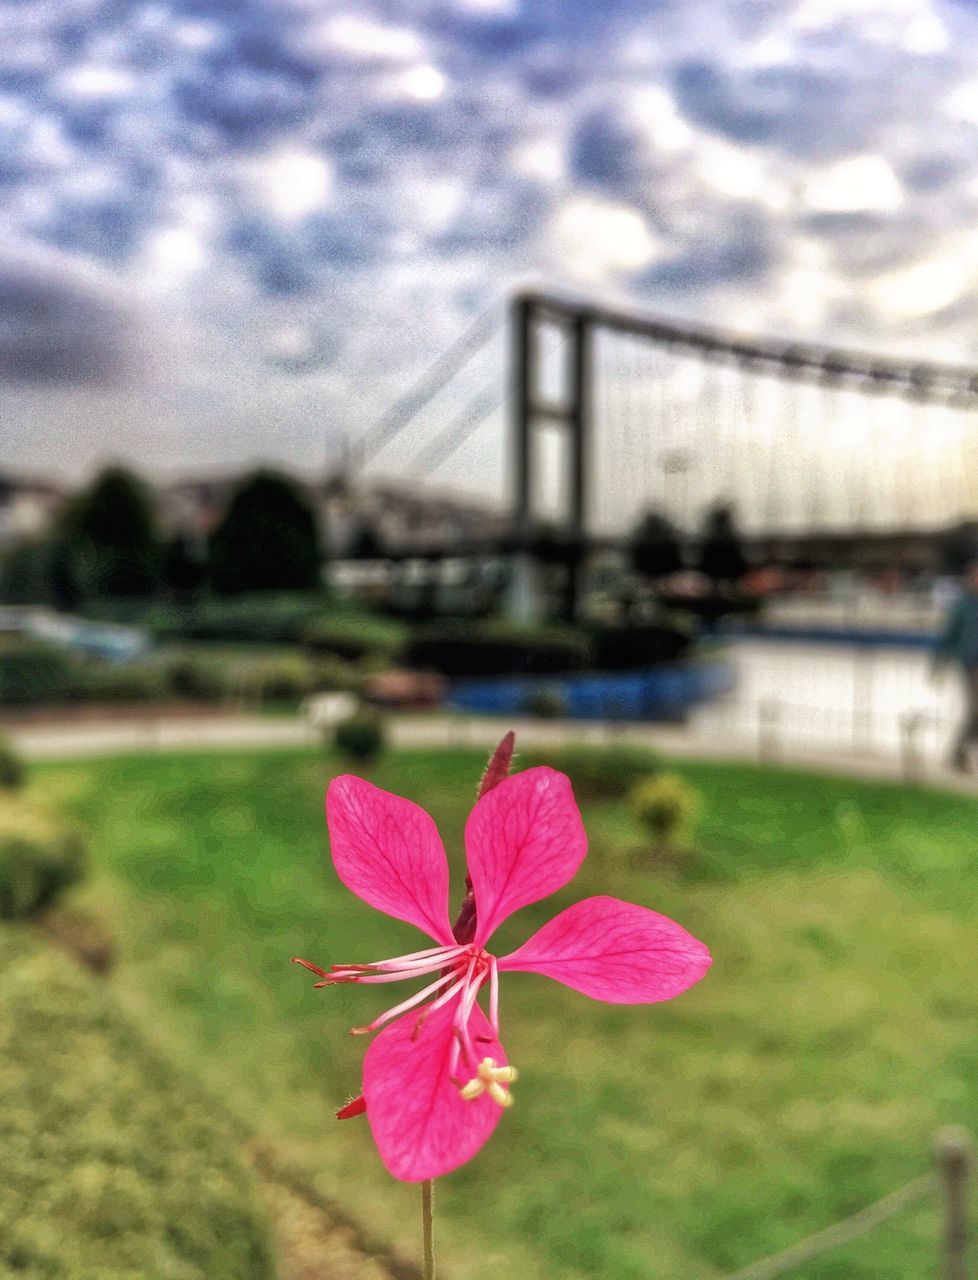 flower, connection, flower head, bridge - man made structure, fragility, petal, suspension bridge, focus on foreground, pink color, beauty in nature, travel destinations, water, built structure, tourism, close-up, architecture, freshness, famous place, nature, growth, sky, international landmark, springtime, in bloom, engineering, outdoors, single flower, day, building story, footpath, vibrant color, no people